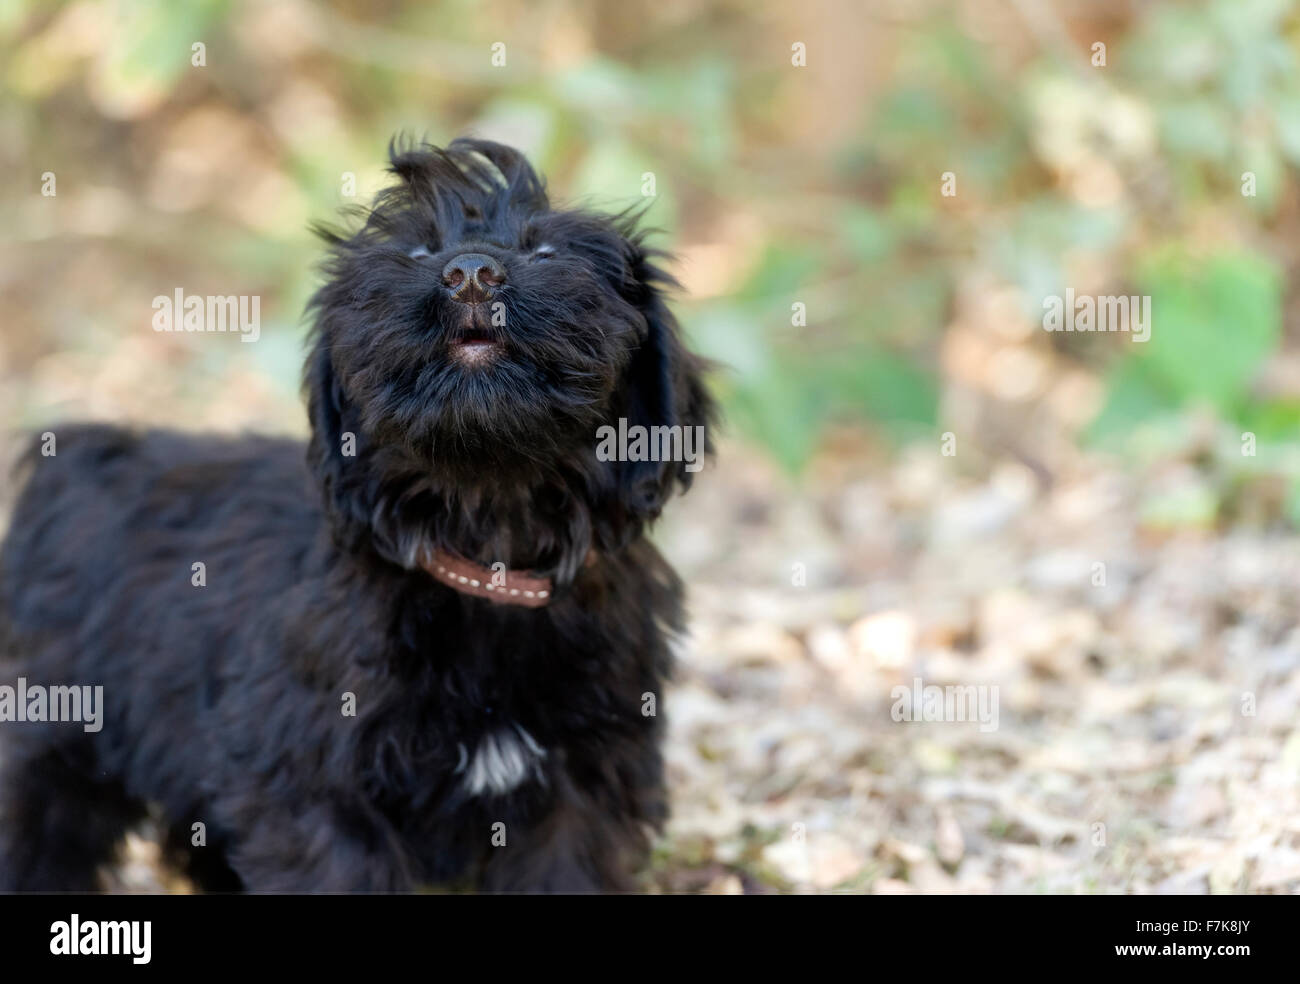 Howling dog is a cute fluffy puppy letting out a great big adorable howl outdoors. Stock Photo